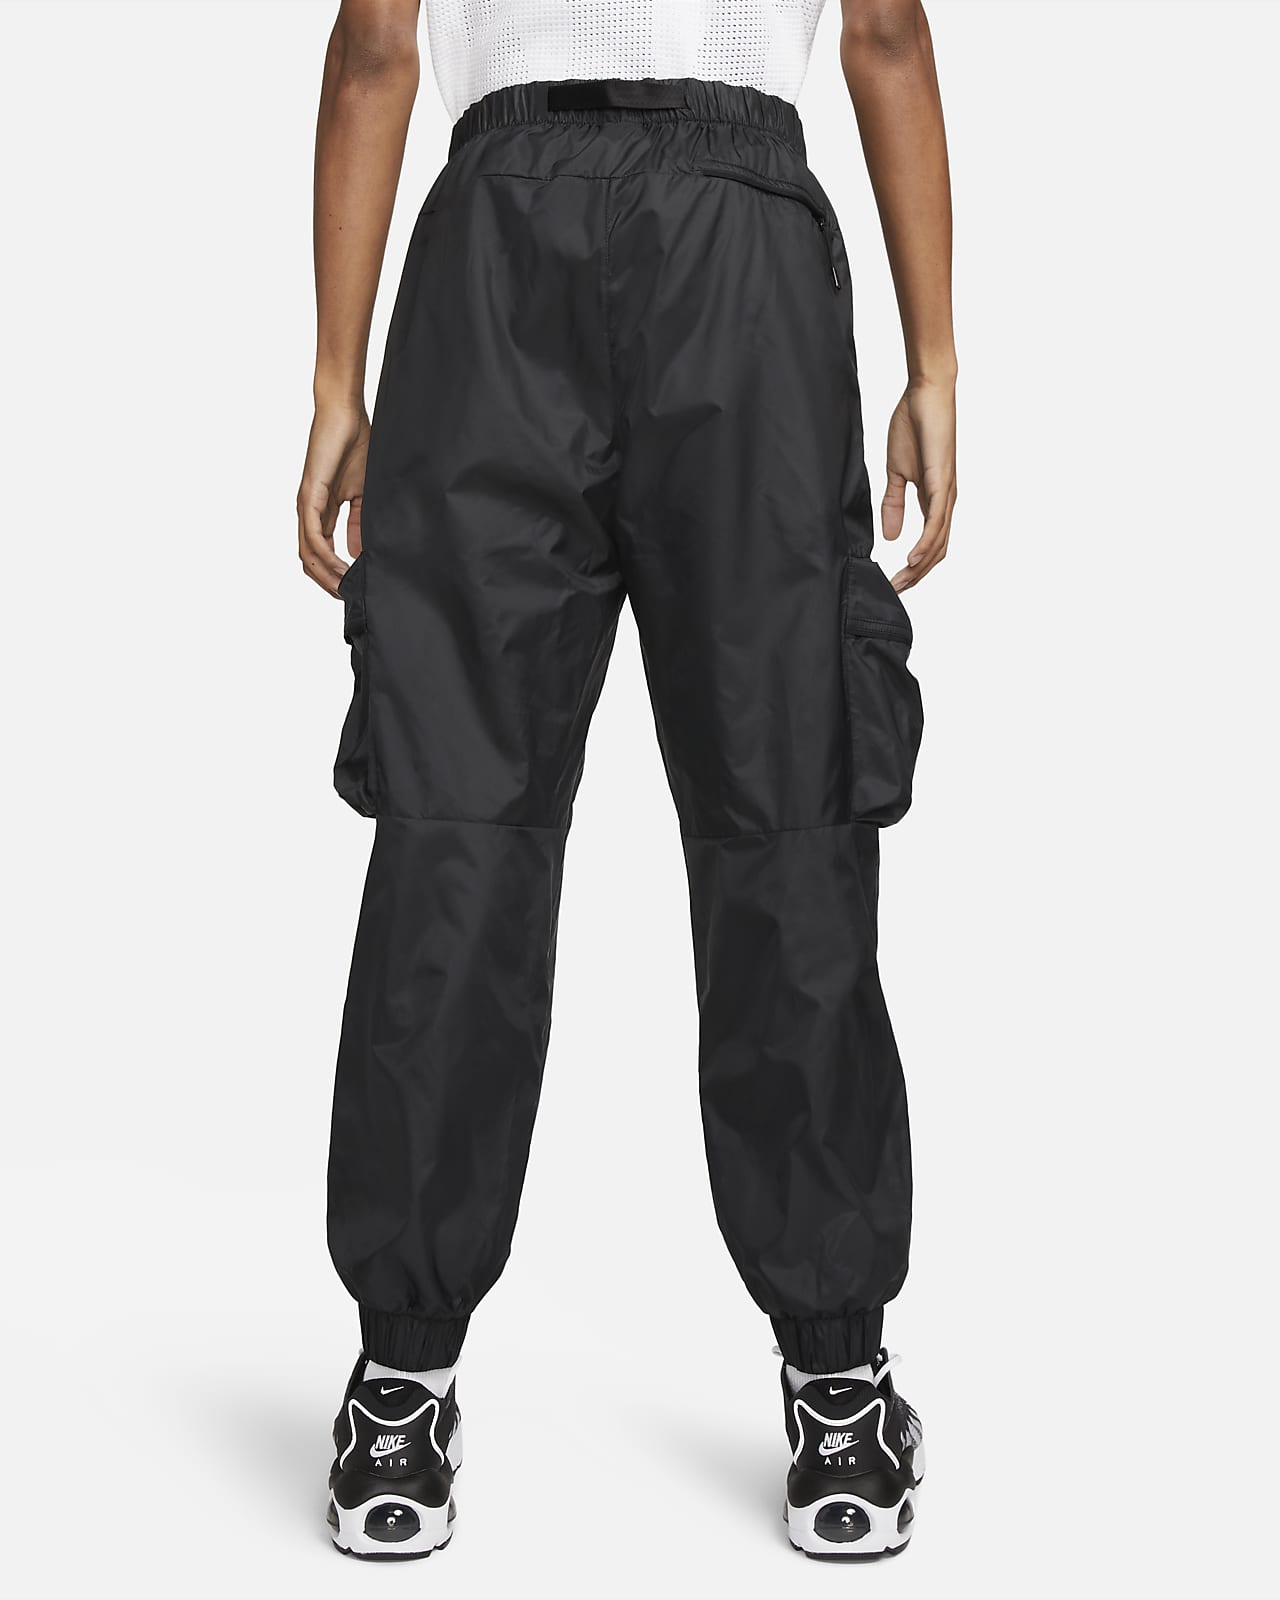 Nike Sportswear Air Men's French Terry Pants Joggers, Black/Dark Smoke  Grey/Ghost Green, M : Amazon.in: Clothing & Accessories